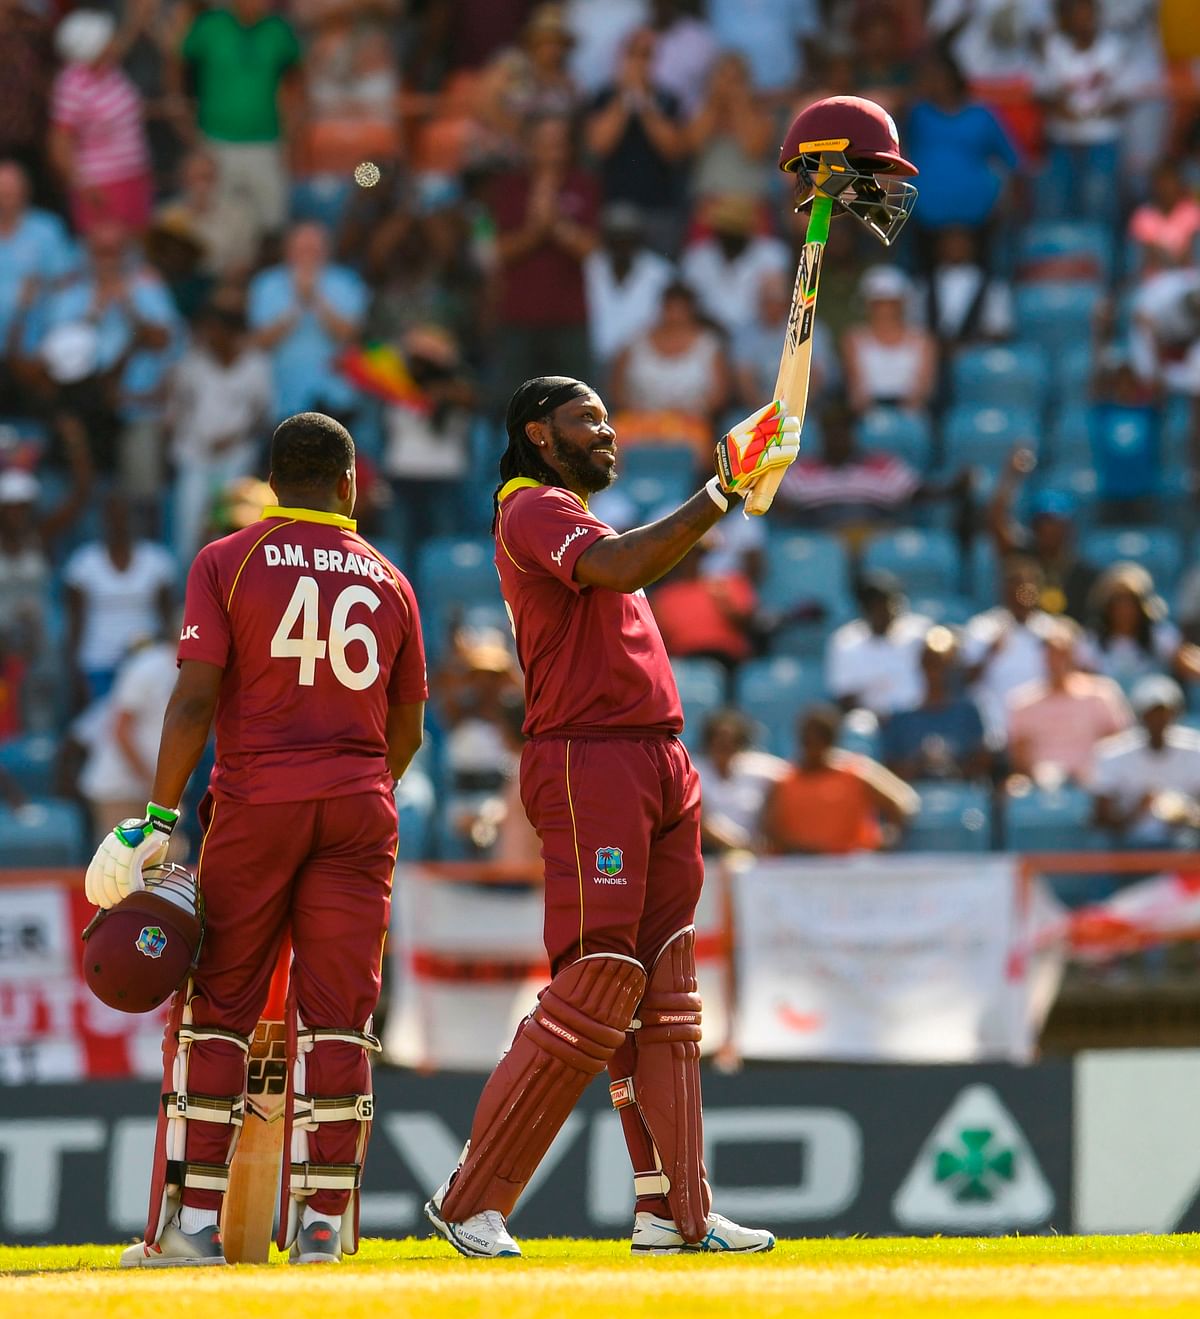 Chris Gayle (R) of West Indies celebrates his century during the 4th ODI between West Indies and England at Grenada National Cricket Stadium, Saint George`s, Grenada, on 27 February 2019. Photo: AFP